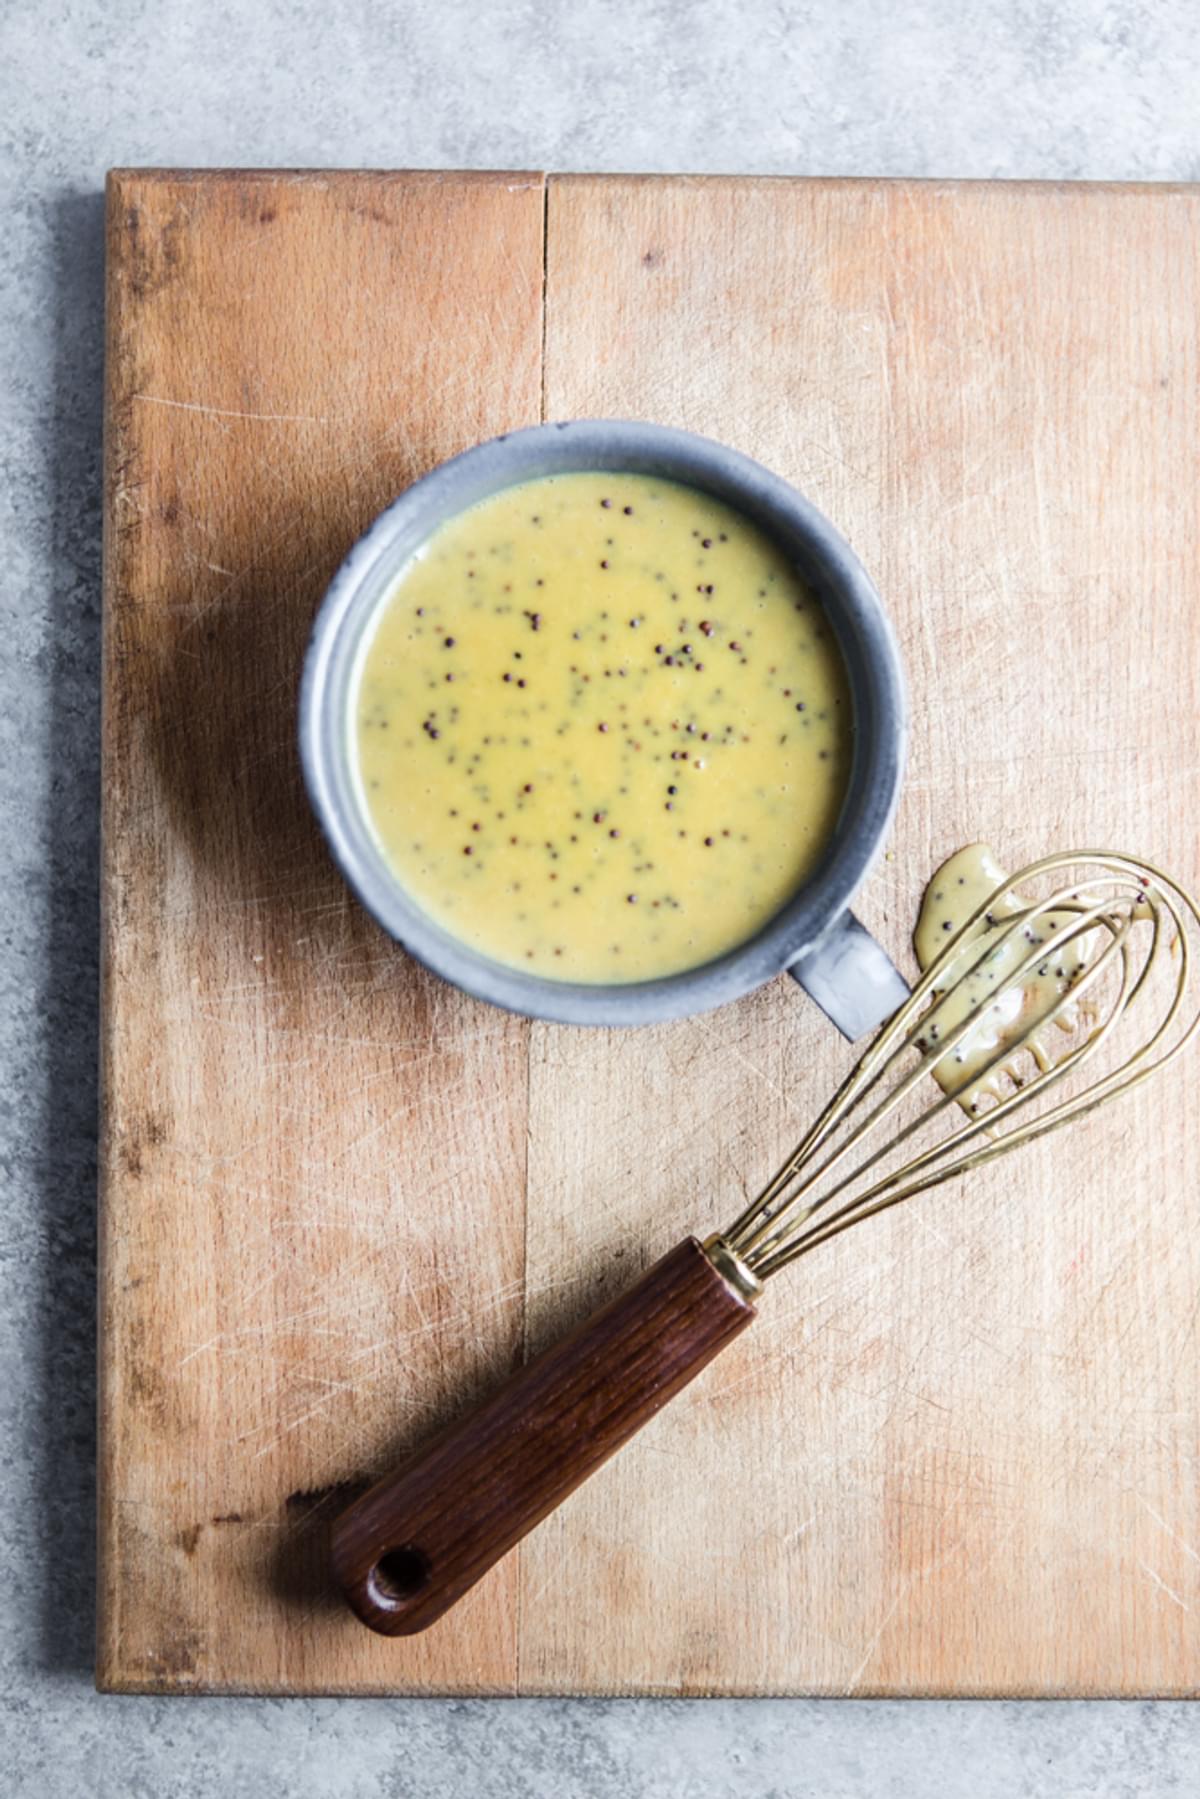 Honey Mustard dressing in a bowl and a Wisk